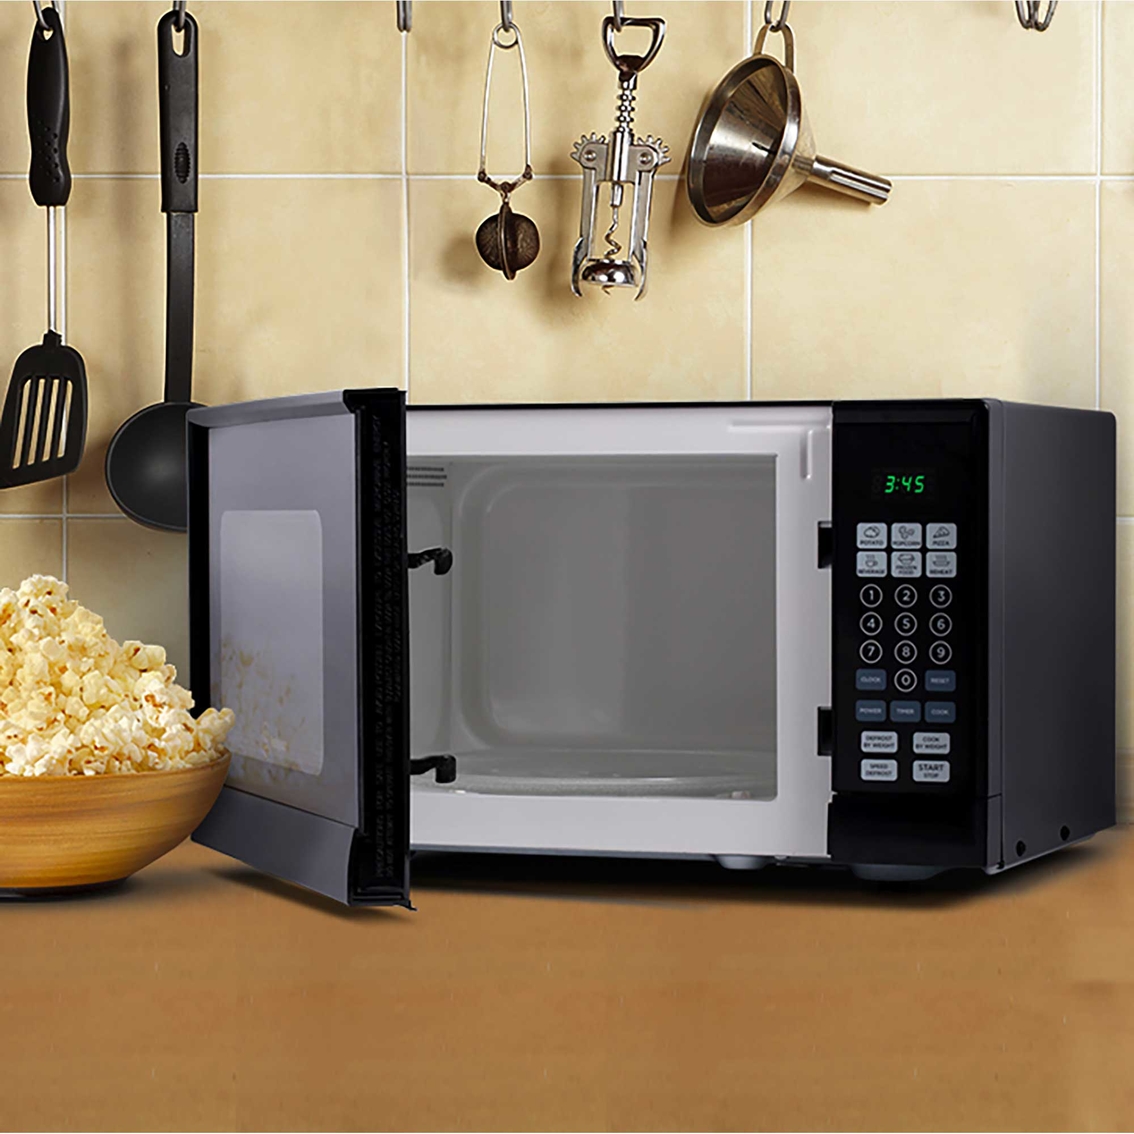 Commercial Chef .9 cu. ft. Counter Top Microwave - Image 7 of 7